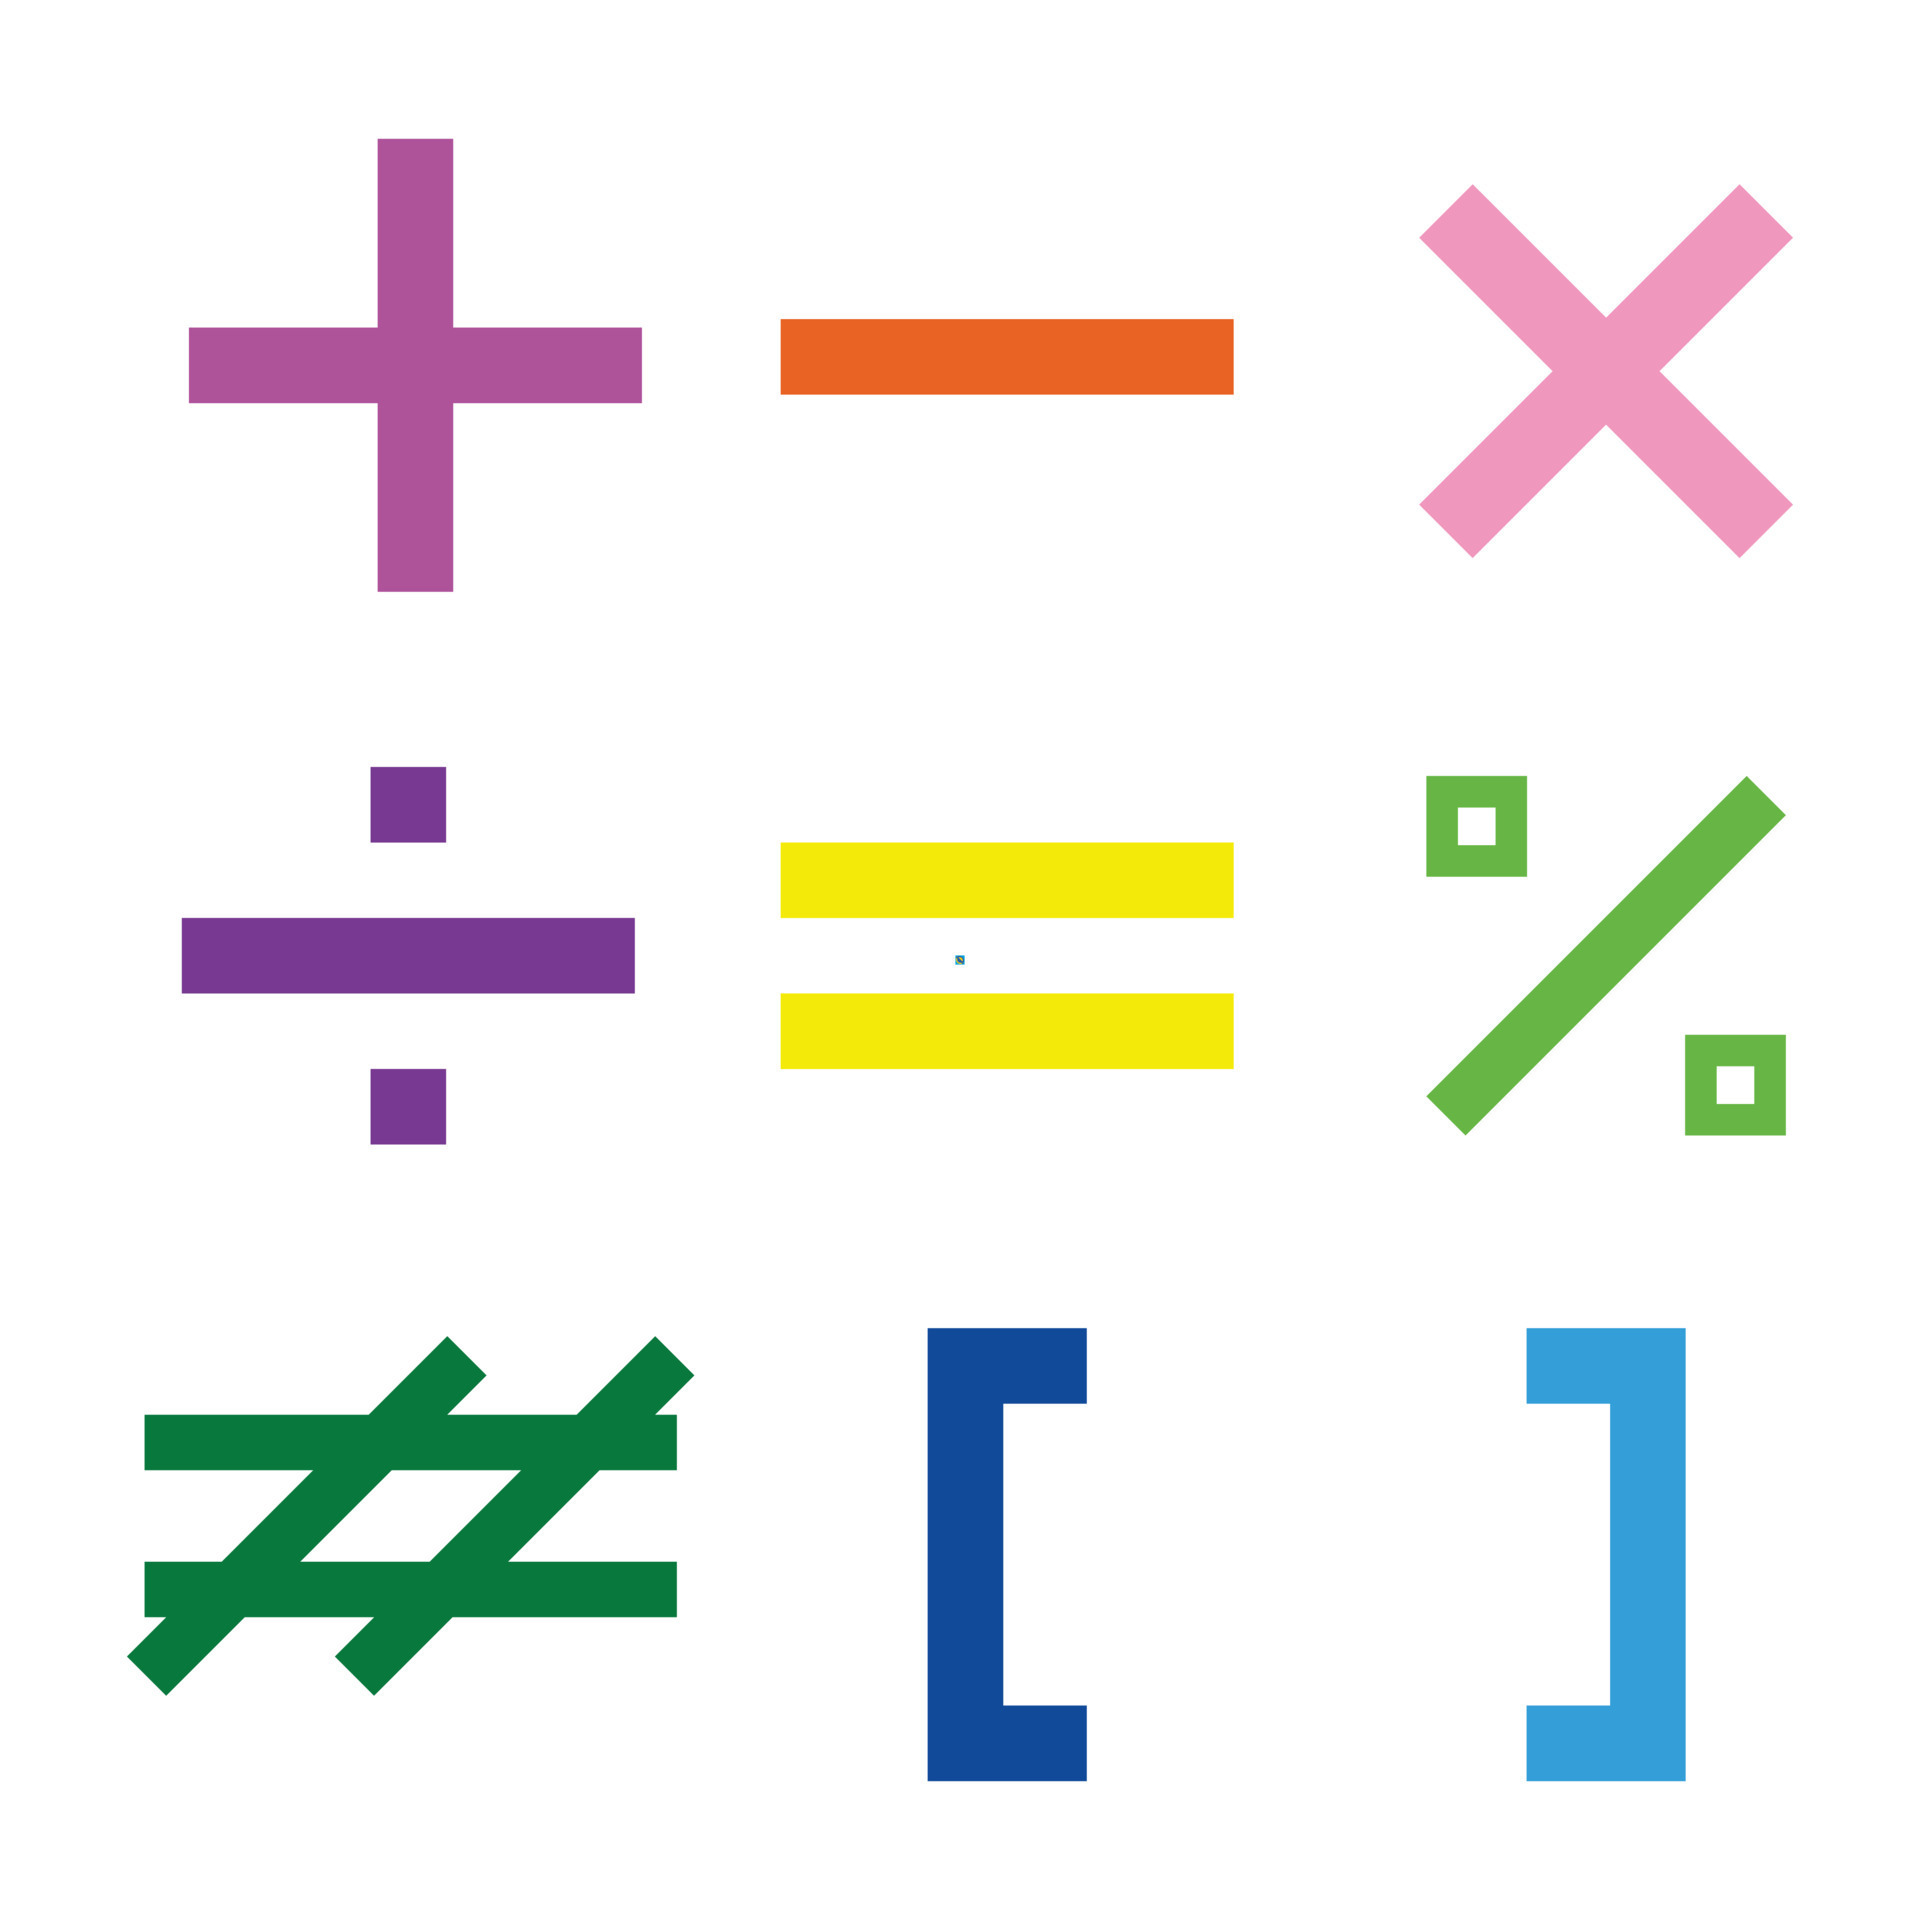 Mathematical Icons and Math symbols. Vector icons for calculations